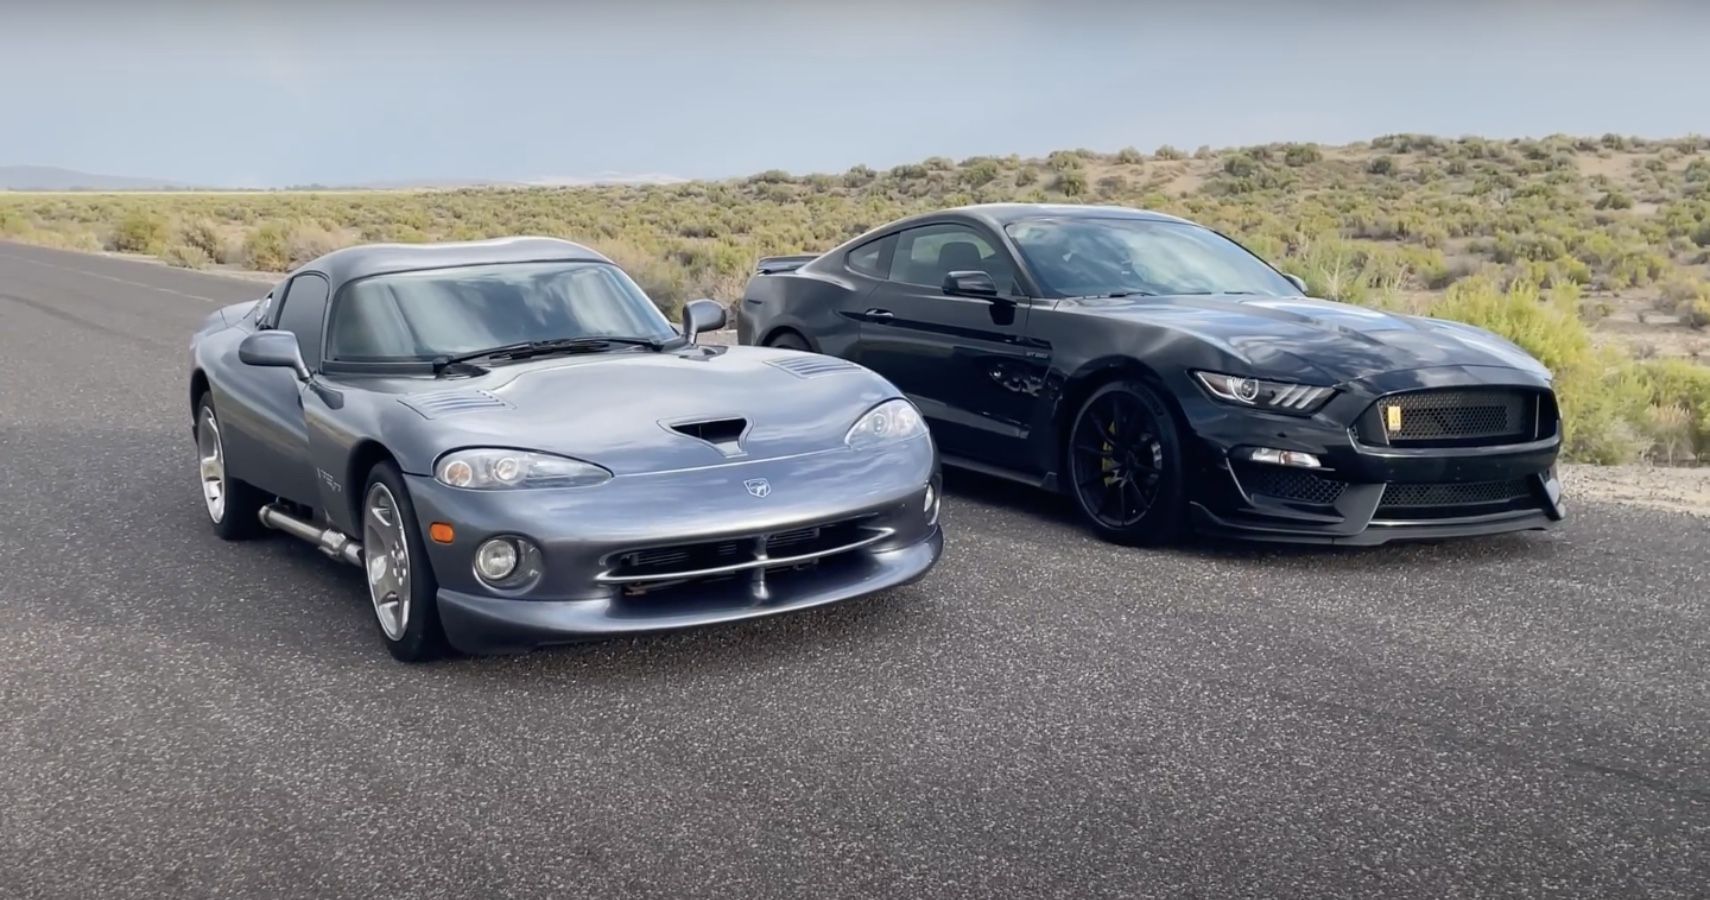 Dark gray Dodge Viper with black Ford Mustang Shelby GT350